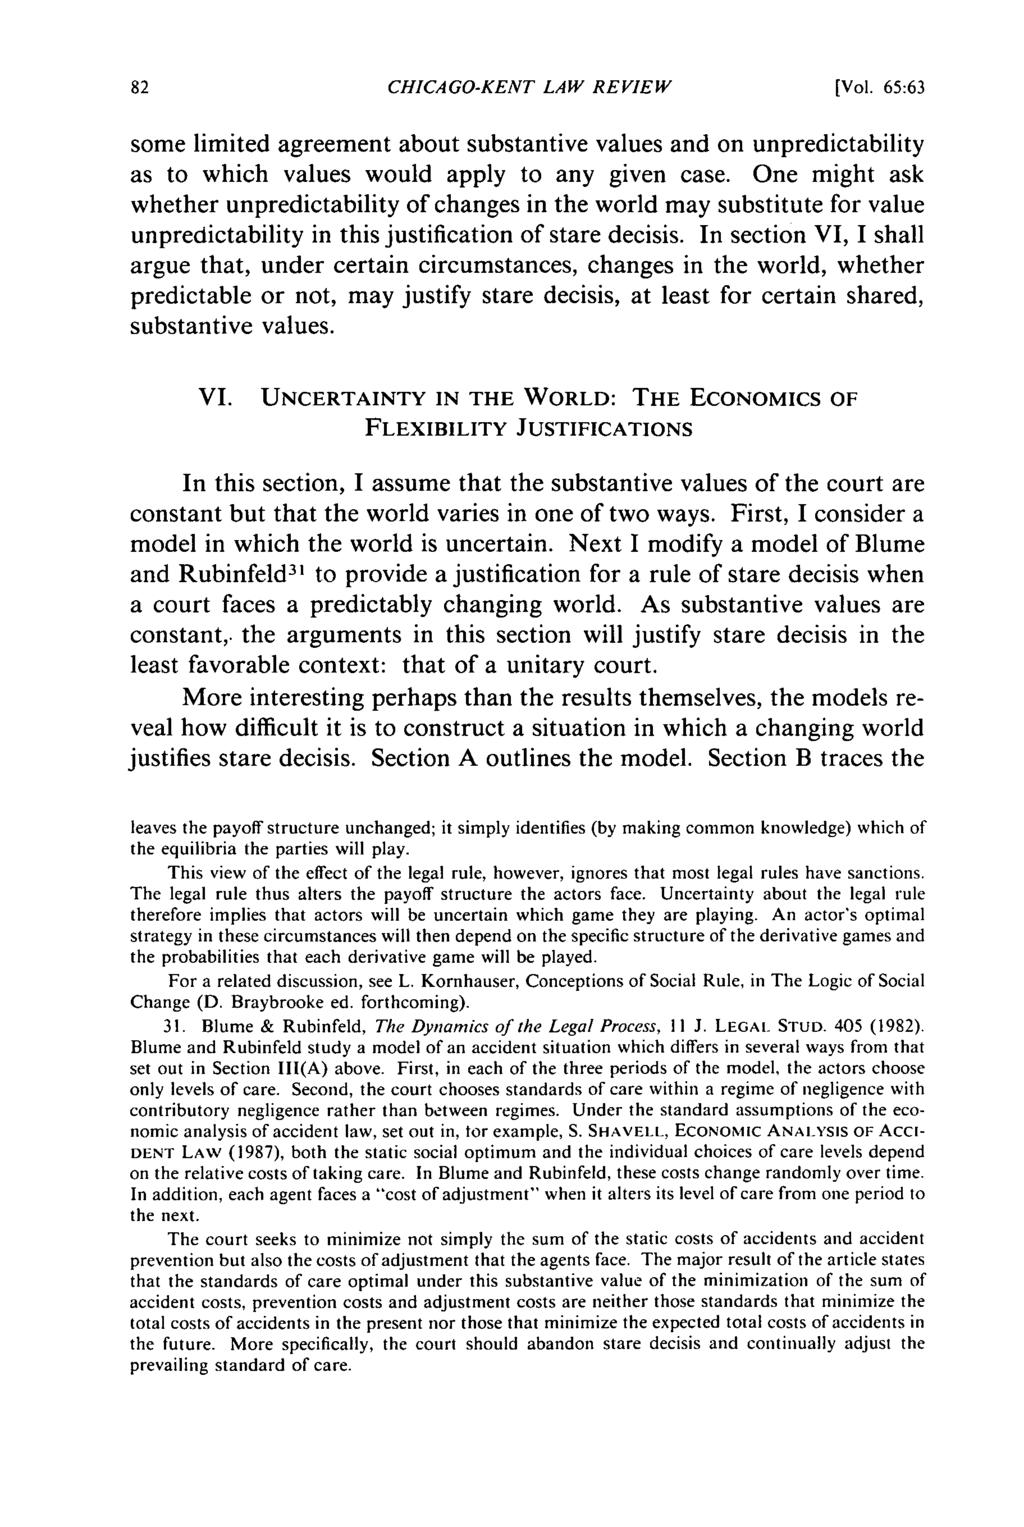 CHICAGO-KENT LAW REVIEW [Vol. 65:63 some limited agreement about substantive values and on unpredictability as to which values would apply to any given case.